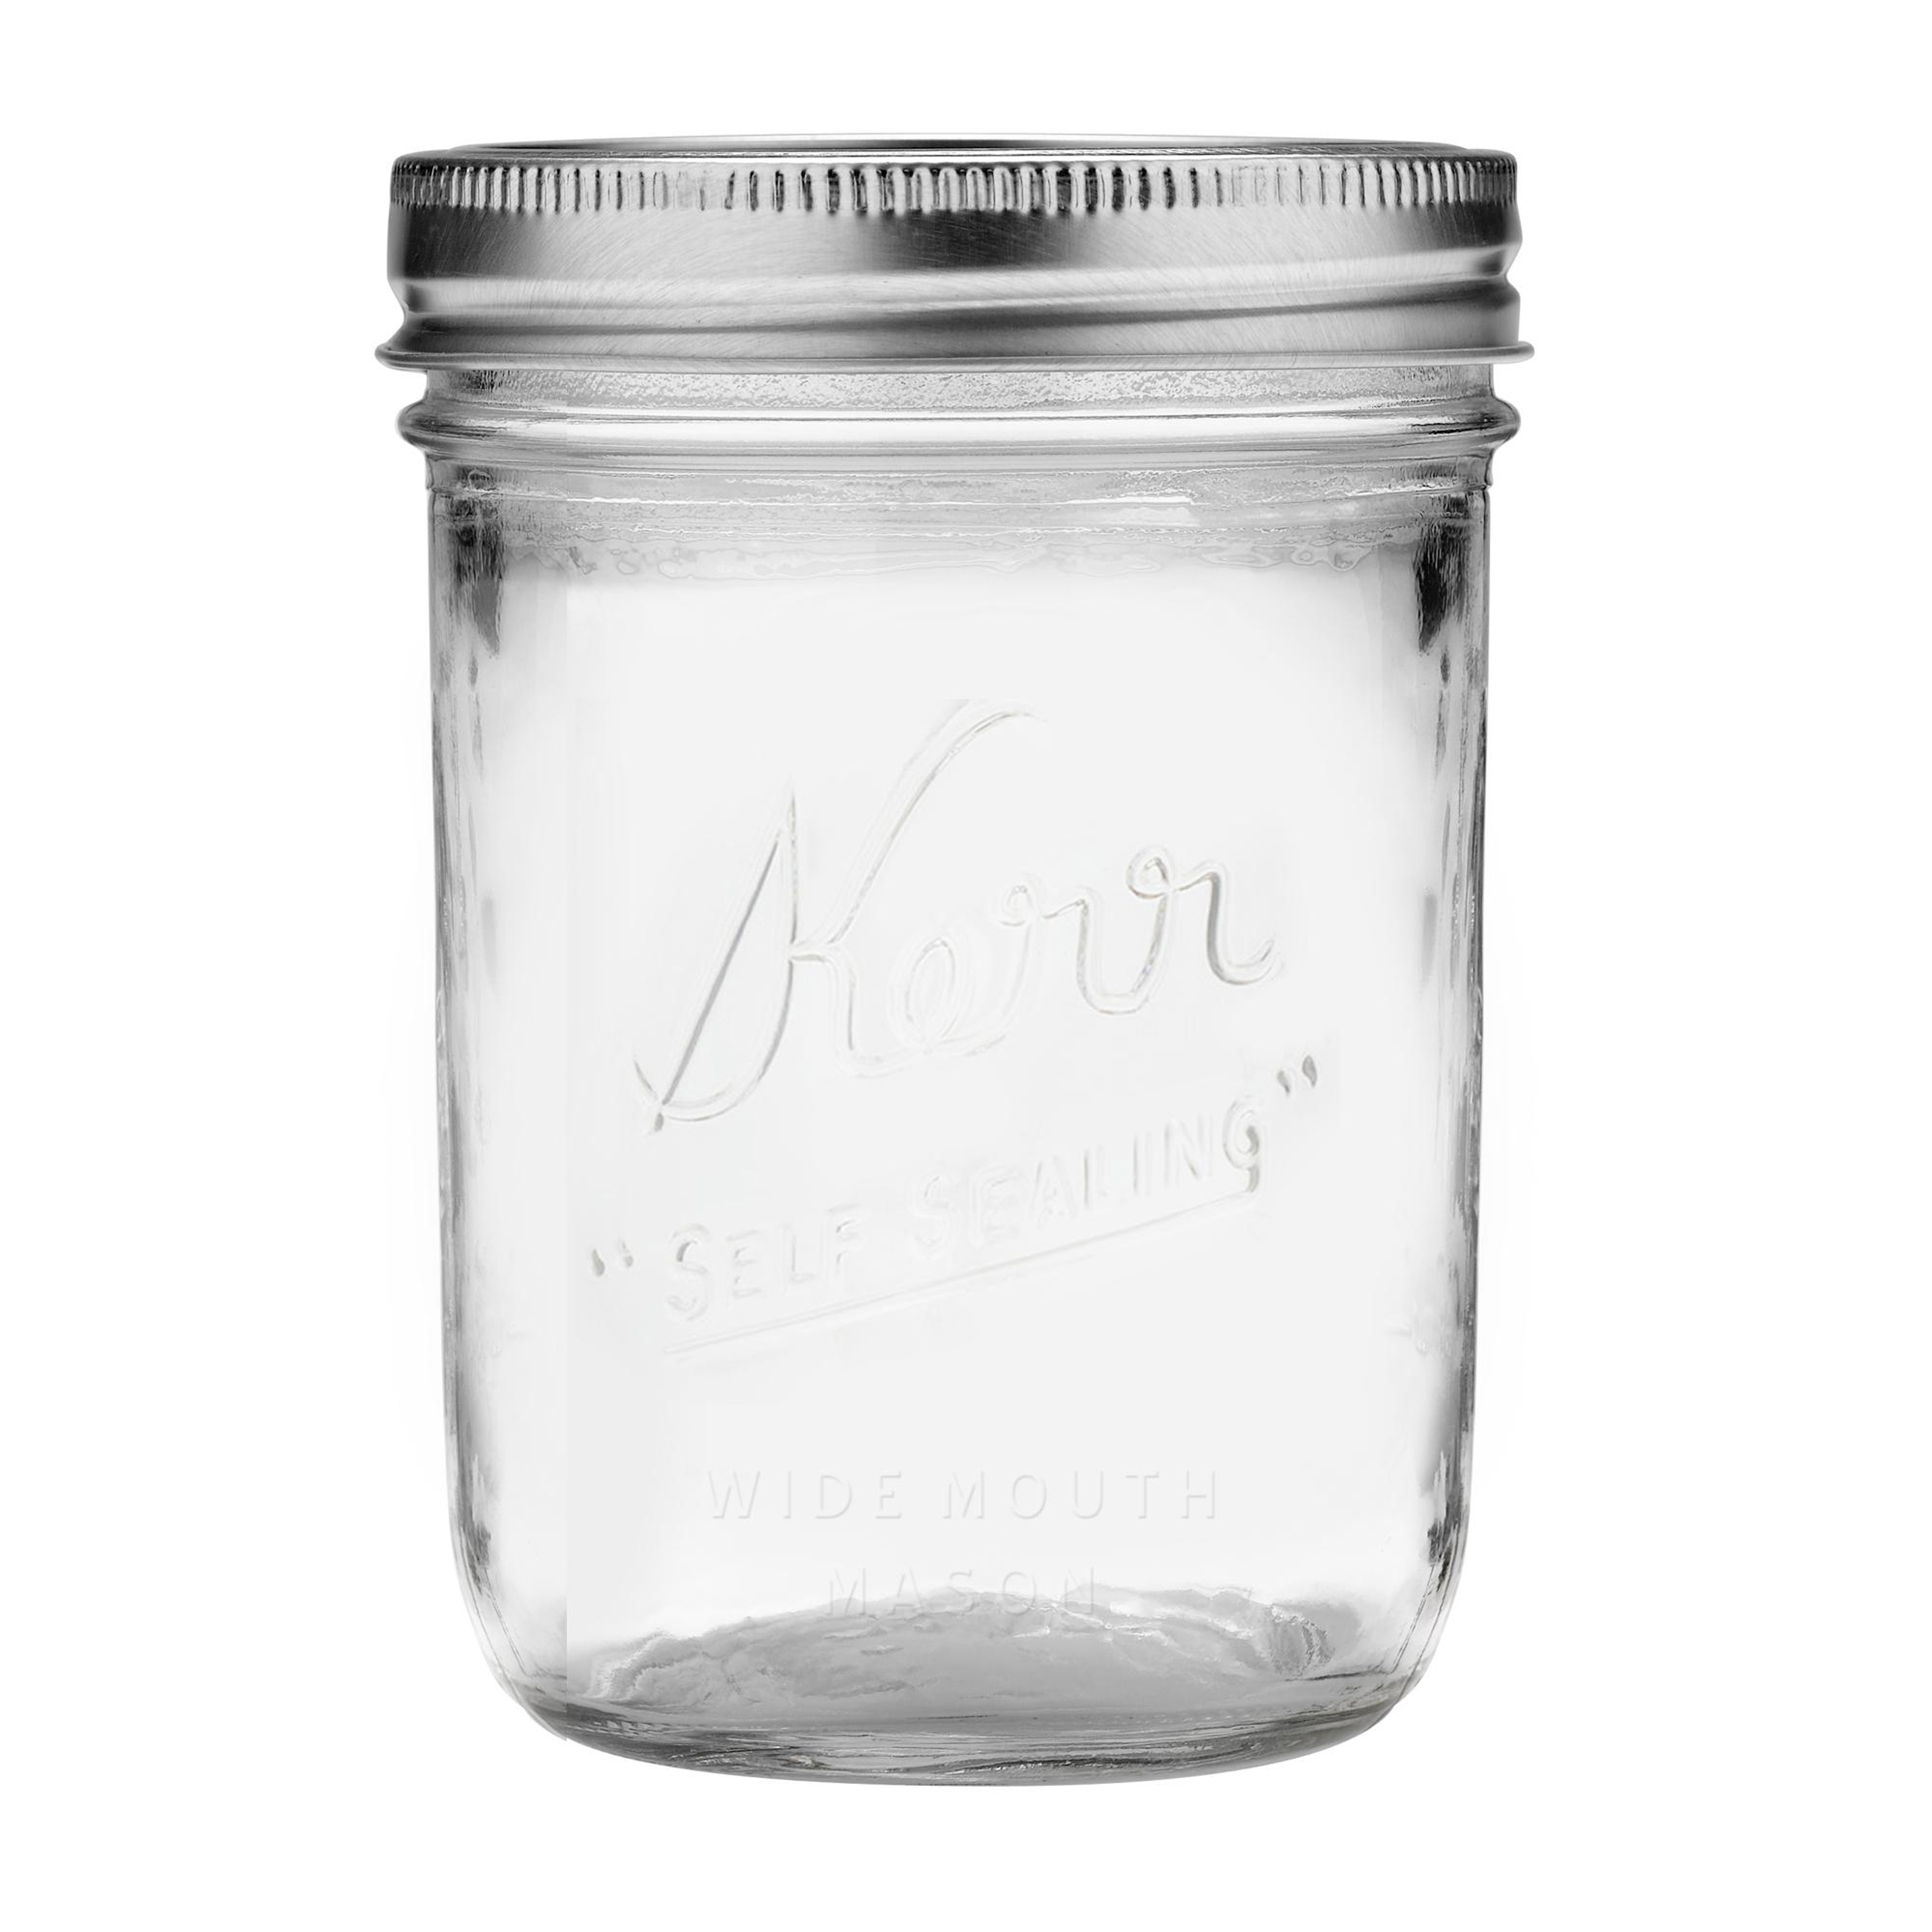 Kerr Wide Mouth Pint Glass Mason Jars with Lids and Bands, 16 oz., 12 Count - image 1 of 7